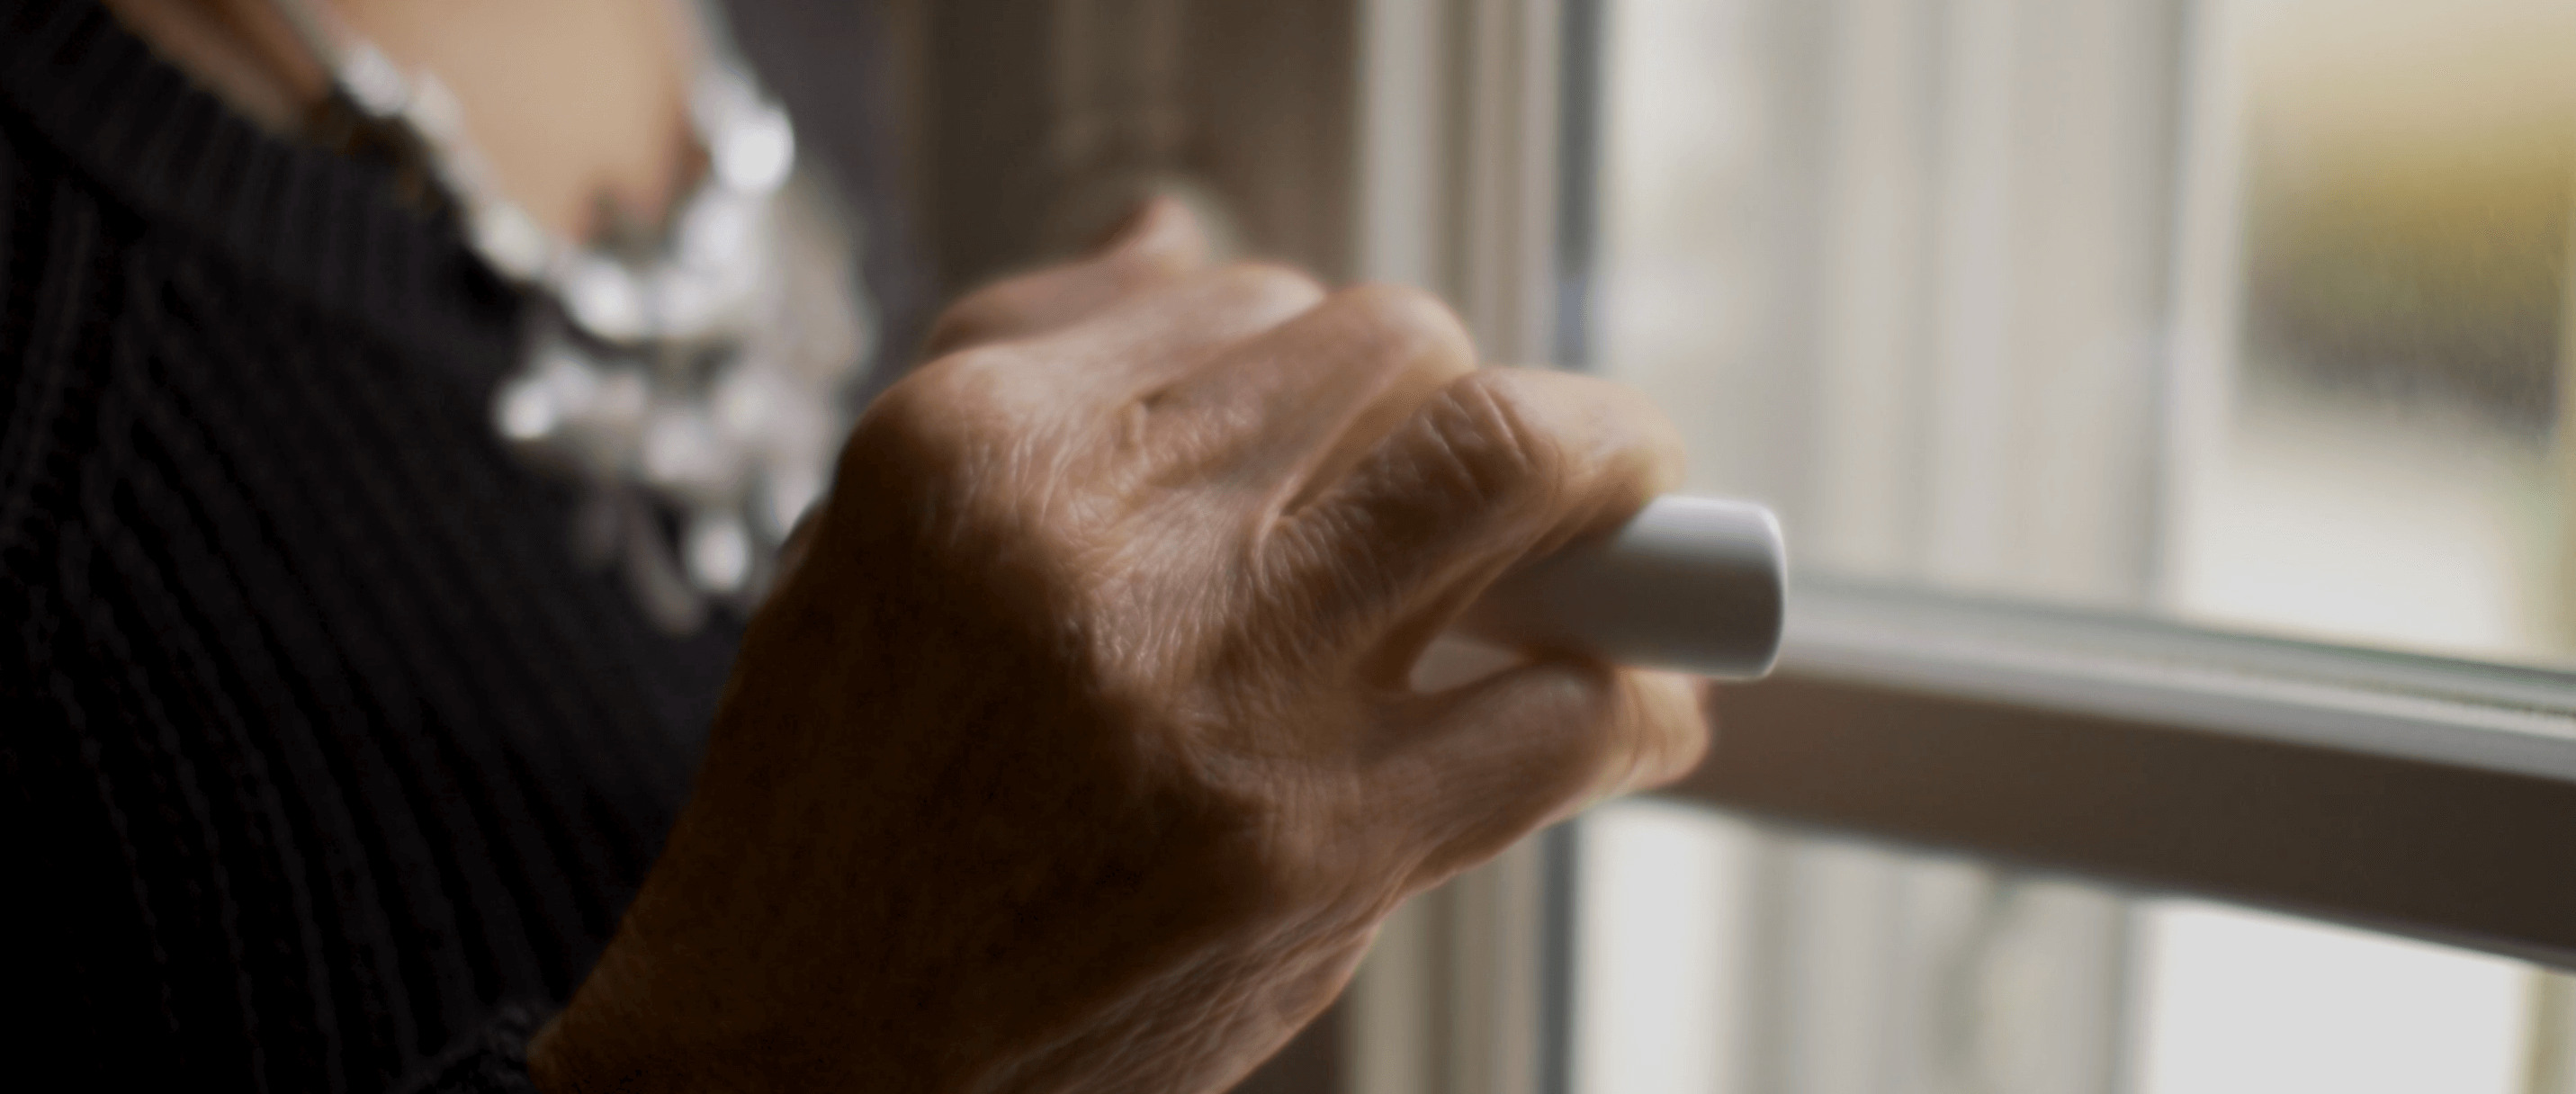 Still from Eskape. Closeup of a woman's hand, holding a window handle as if about to open it. Her hand is in focus, and wrinkles are visible, and her fingernails are painted red. Out of focus, her torso is seen. She is wearing a black sweater and a large silver necklace.